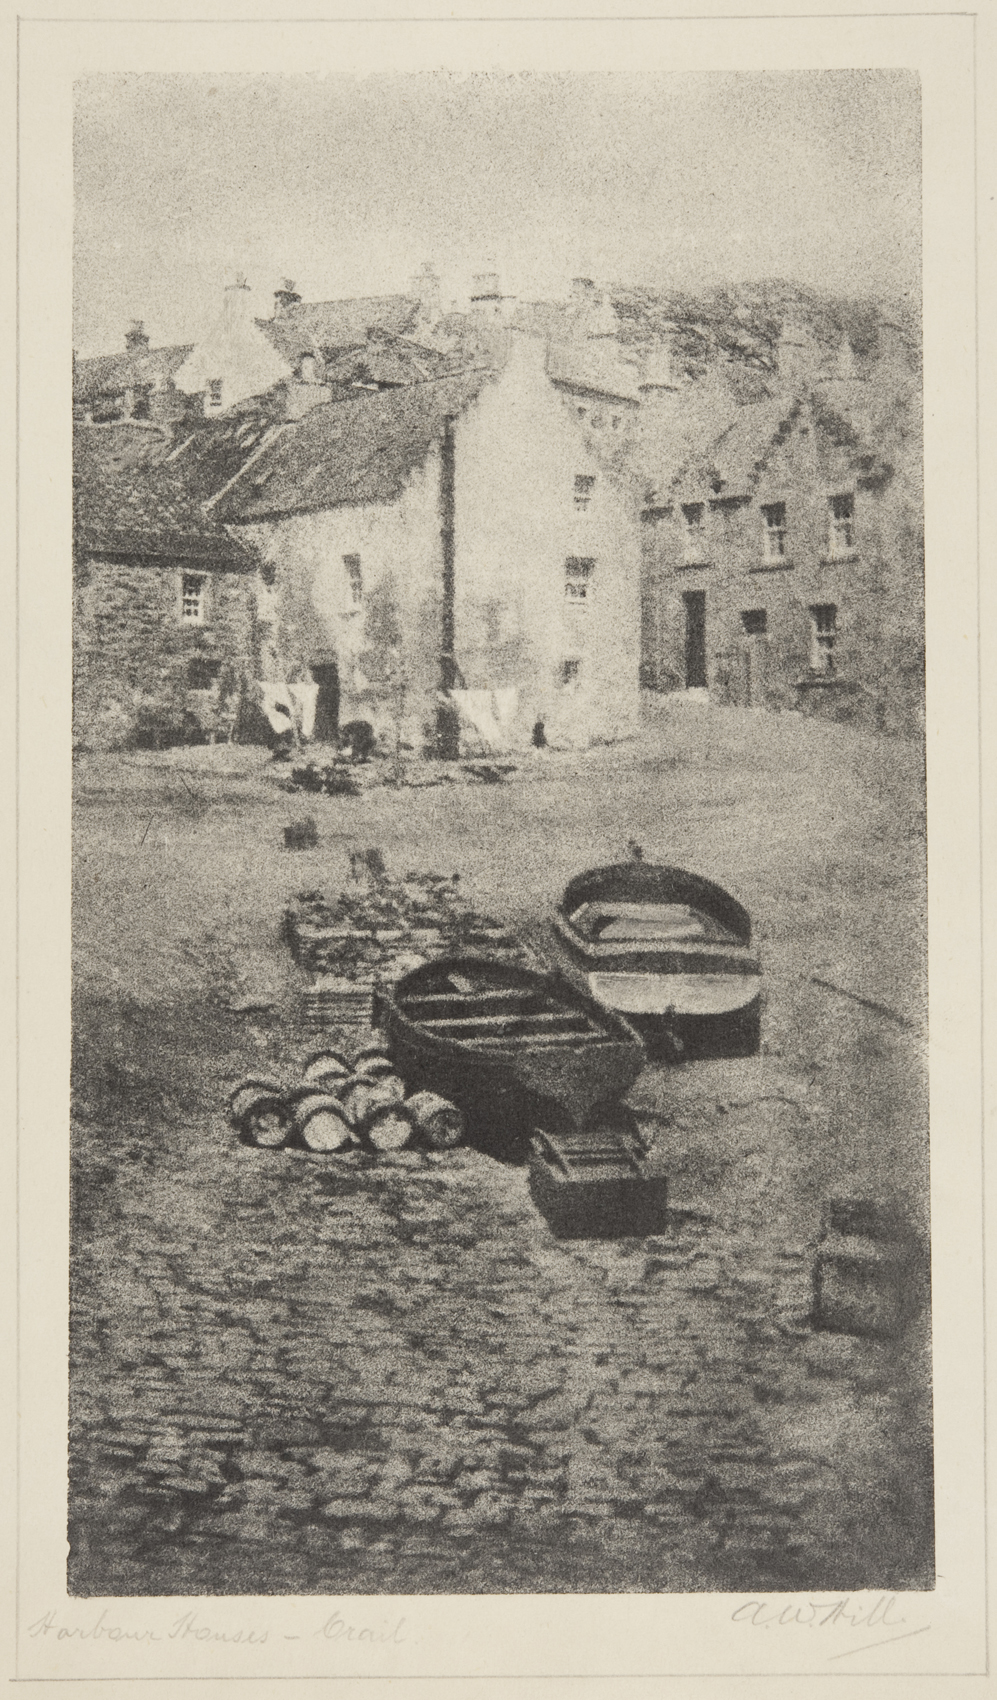 "Harbour Houses – Crail", bromoil transfer print, date unknown ca.1920s-30s, by Alexander Wilson Hill (1867-1949)